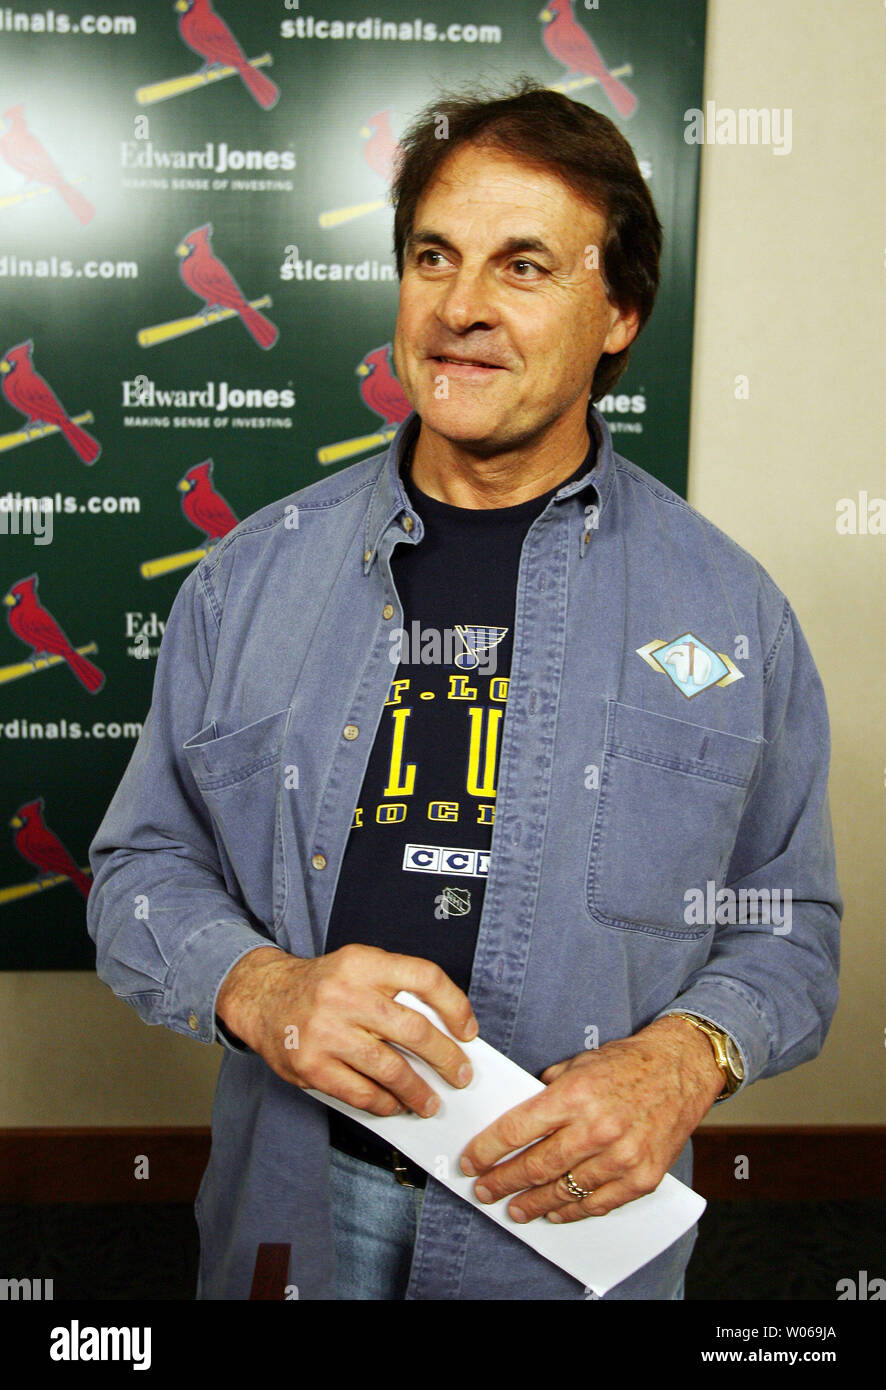 St. Louis Cardinals manager Tony La Russa talks informally with reporters about new players the team has signed, contract negotations with current players and his plans for the upcoming 2007 season, at Busch Stadium in St. Louis on December 13, 2006. (UPI Photo/Bill Greenblatt) Stock Photo